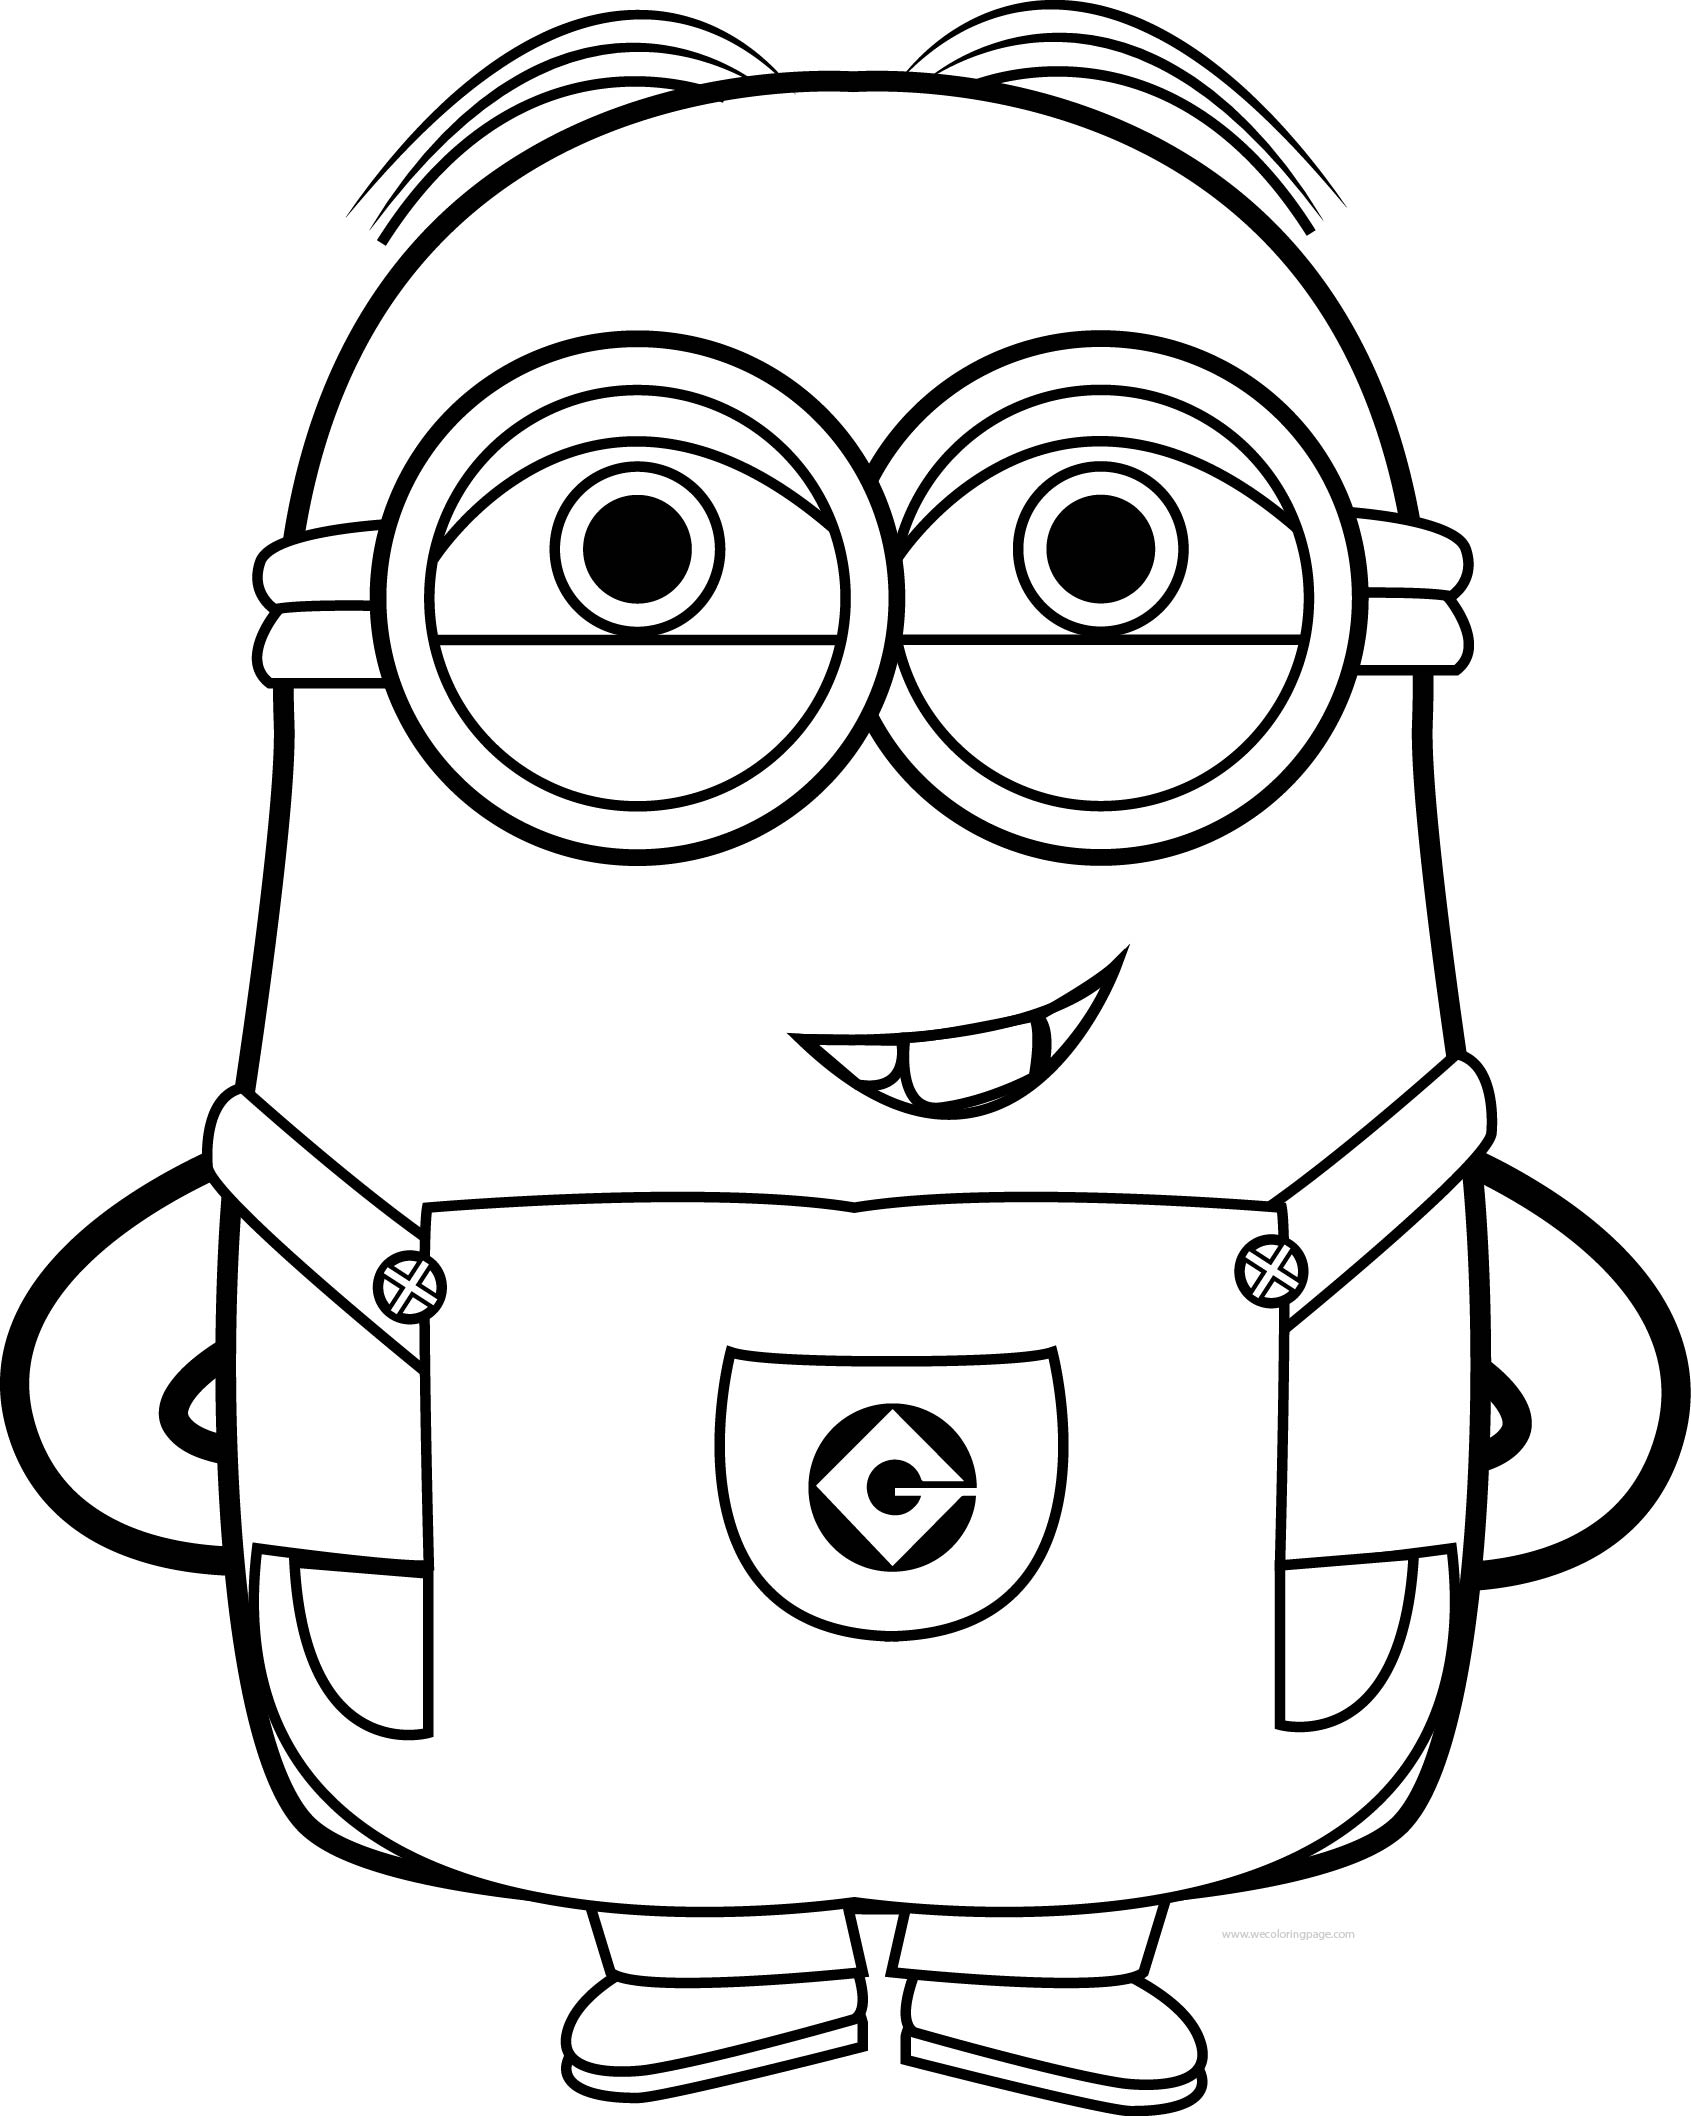 Bob The Minion Coloring Pages at GetColorings.com | Free ...